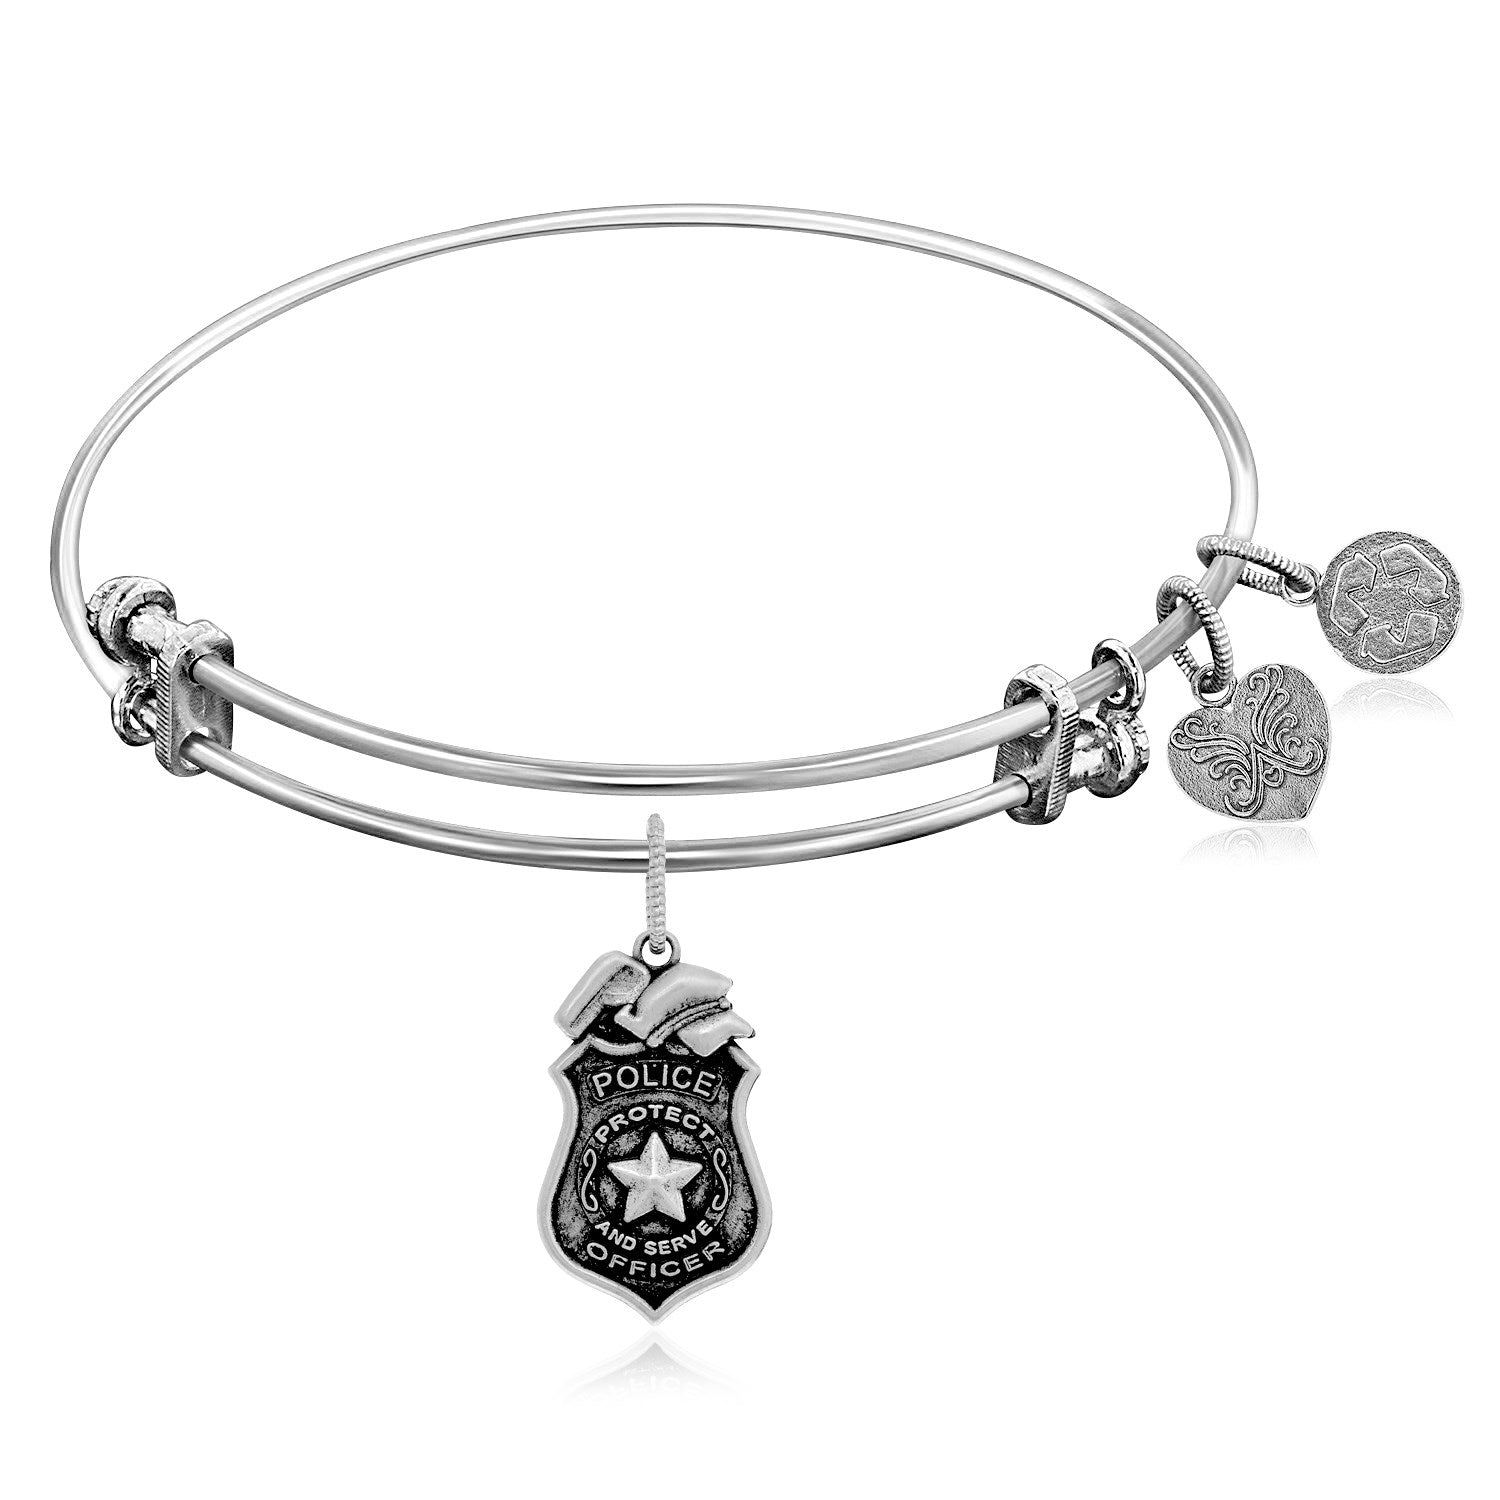 Expandable White Tone Brass Bangle with Police Symbol